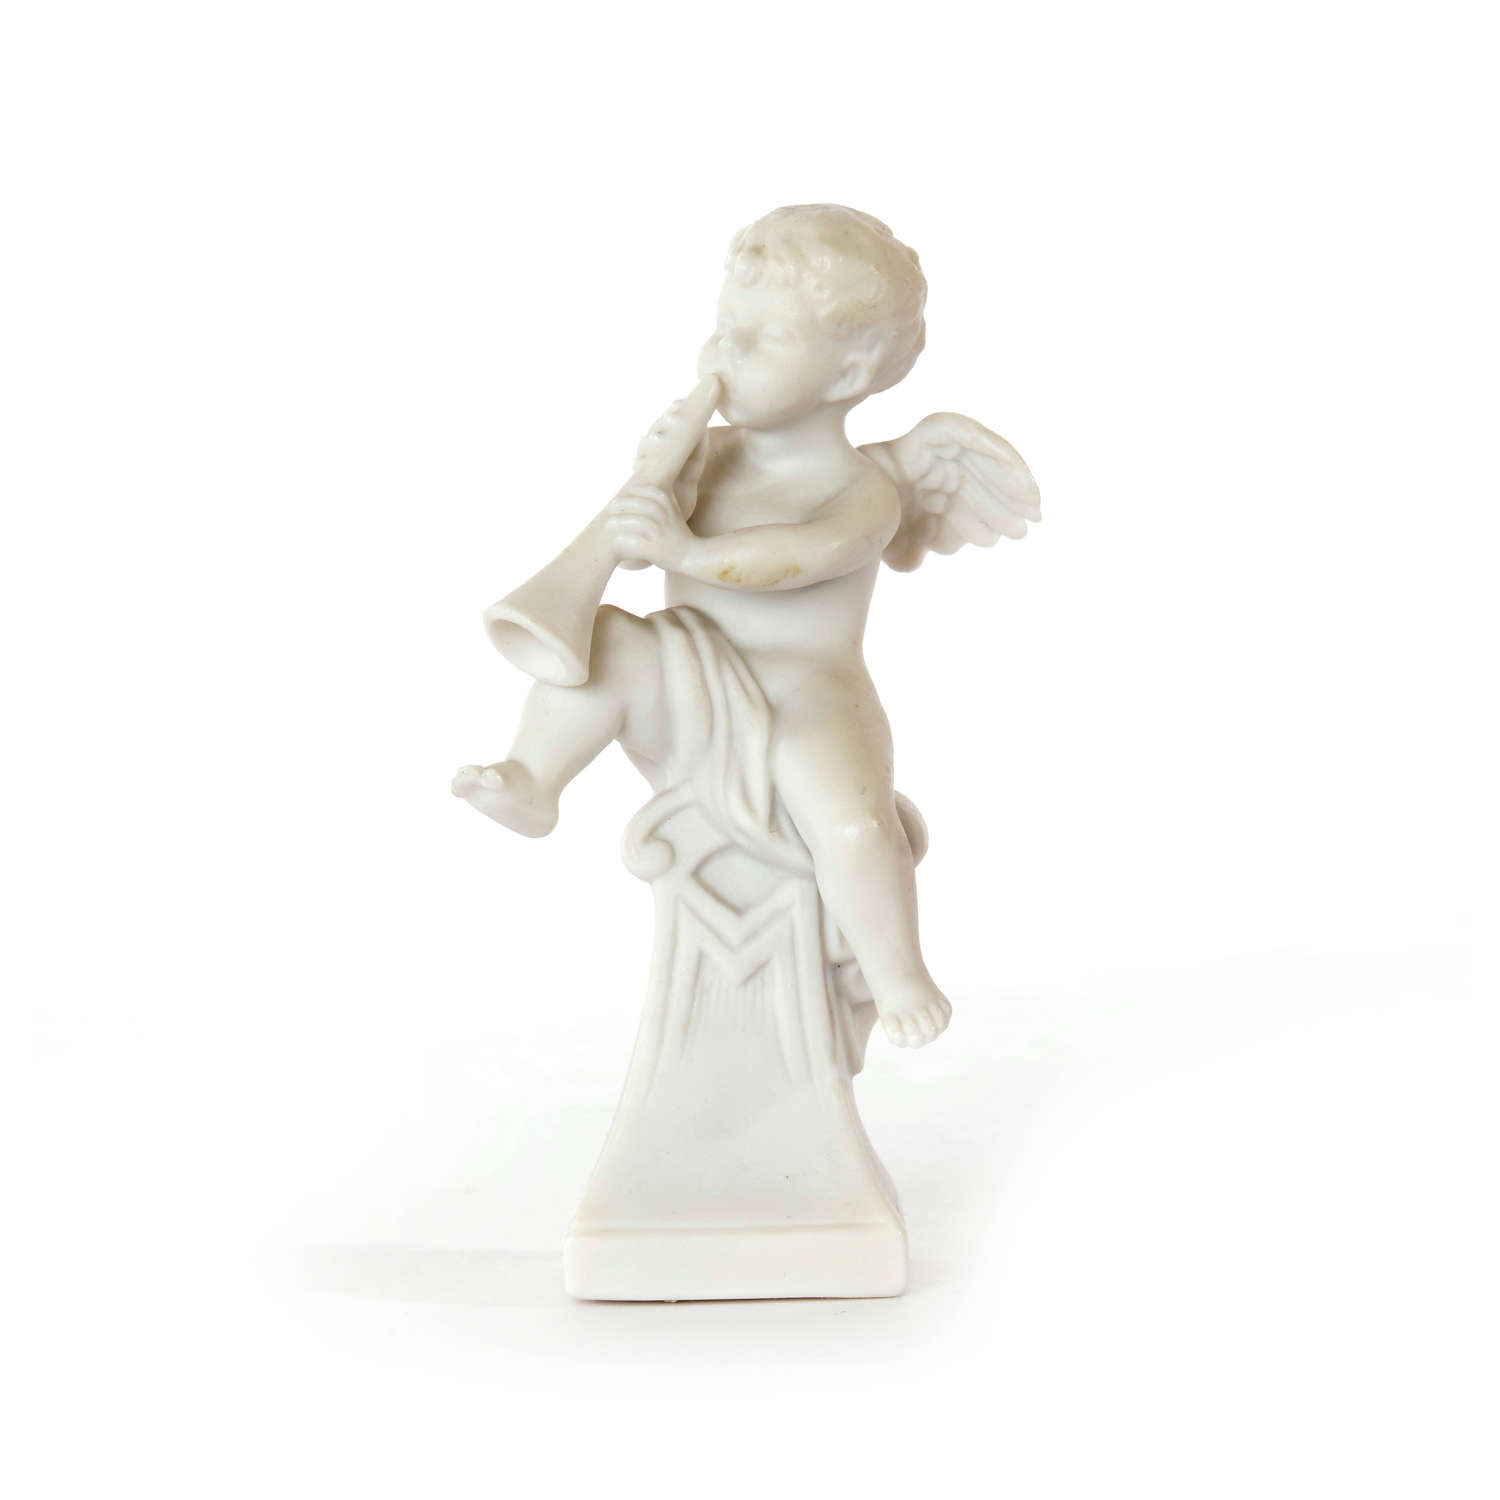 A miniature Parian ware figure of a putti playing the trumpet